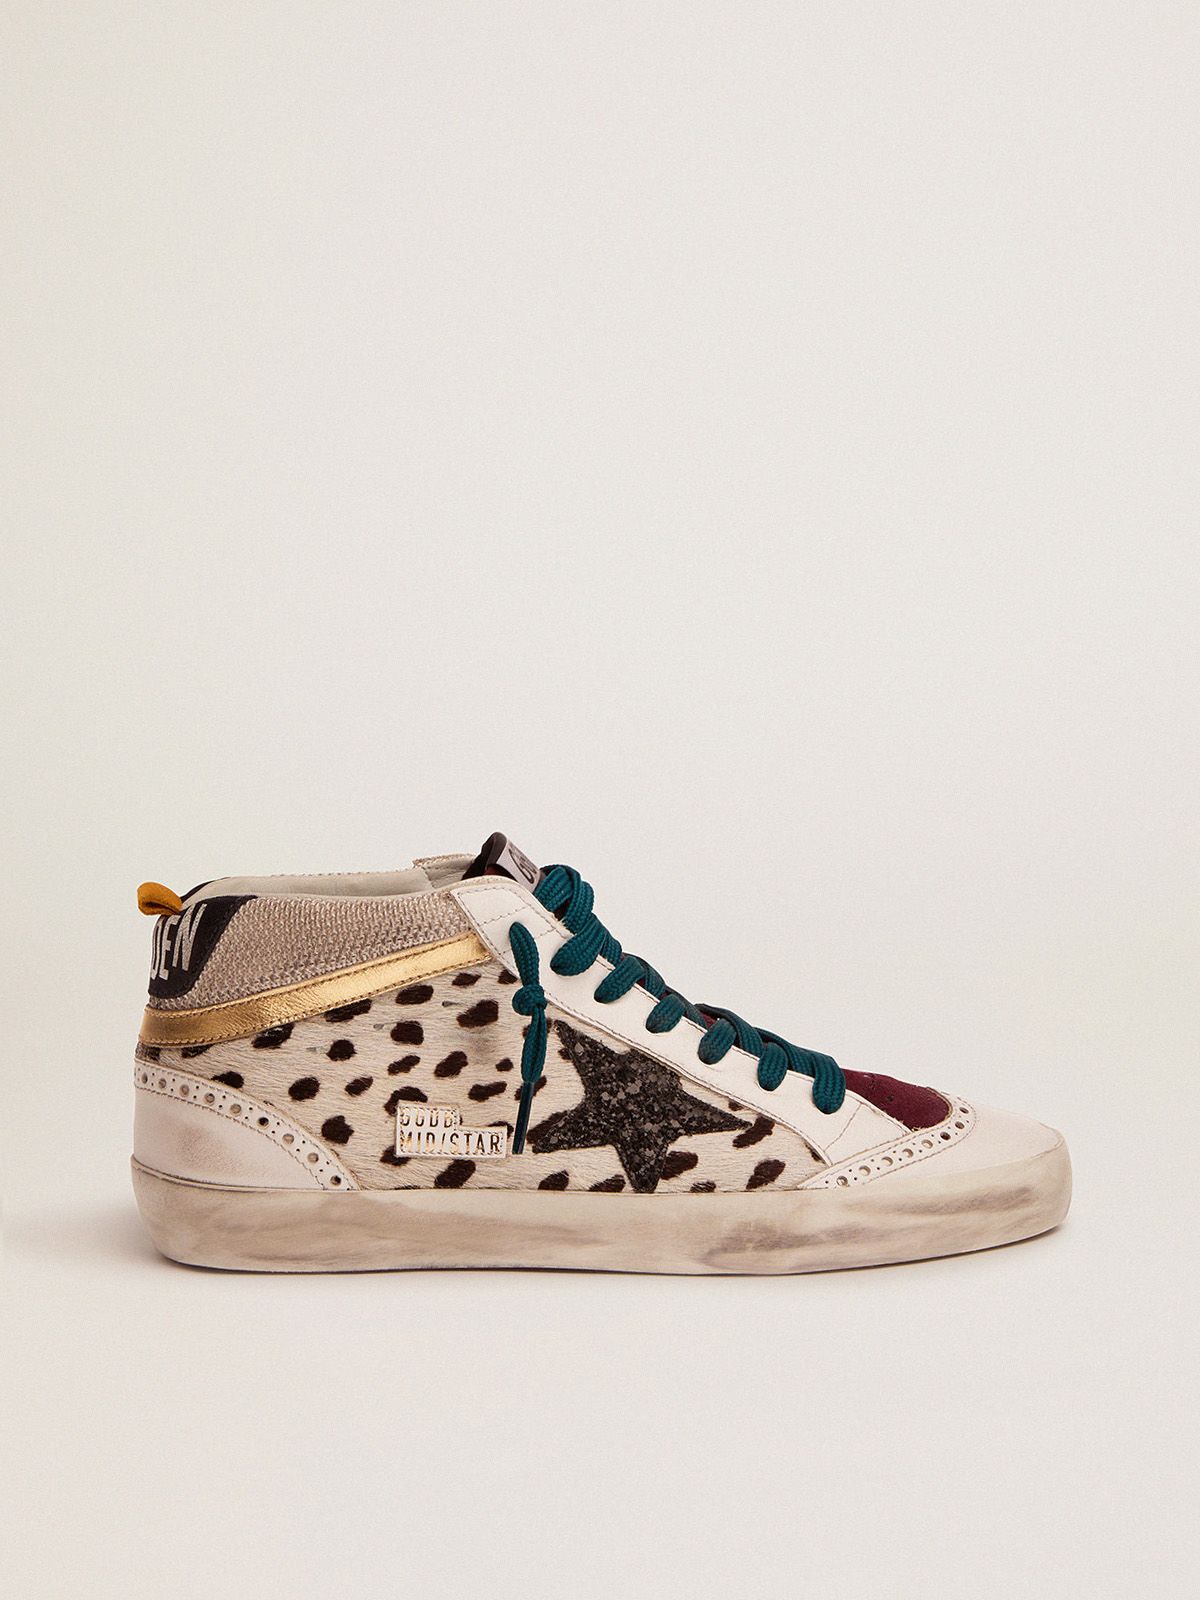 Mid Star sneakers with animal-print pony skin upper and black glitter star | 